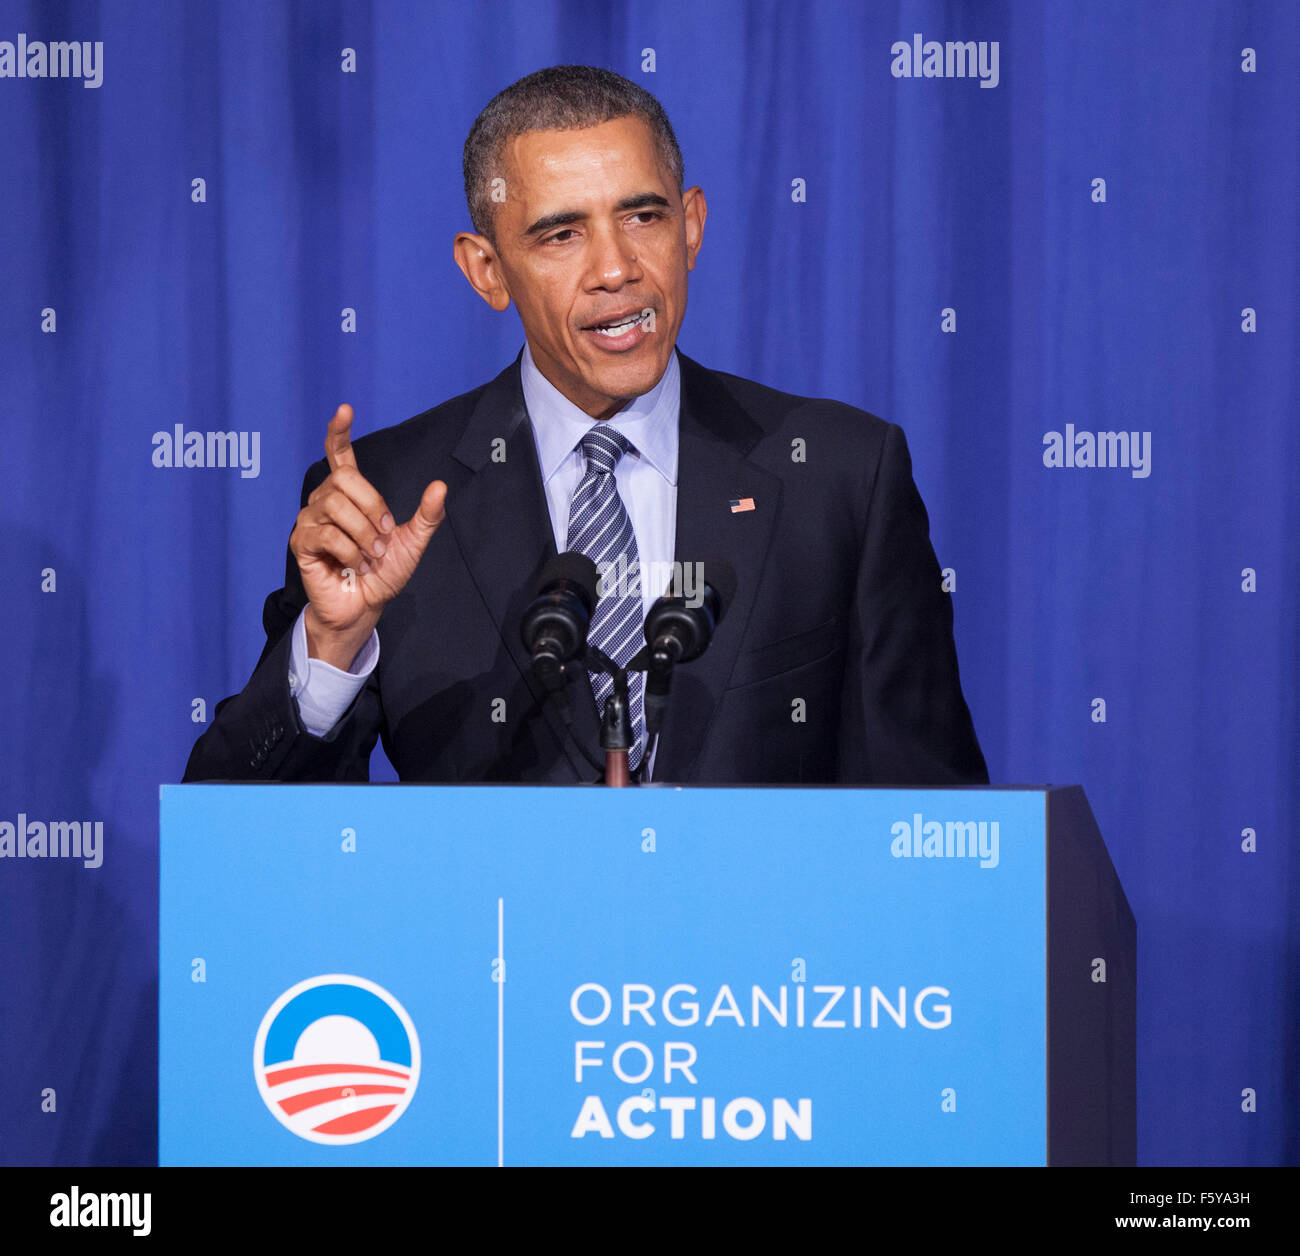 Washington, DC, USA. 09th Nov, 2015. United States President Barack Obama makes remarks at an Organizing for Action dinner at the St. Regis Hotel in Washington, DC on Monday, November 9, 2015. Organizing for Action is a community organizing project that supports the policies of the President. Credit:  dpa picture alliance/Alamy Live News Stock Photo